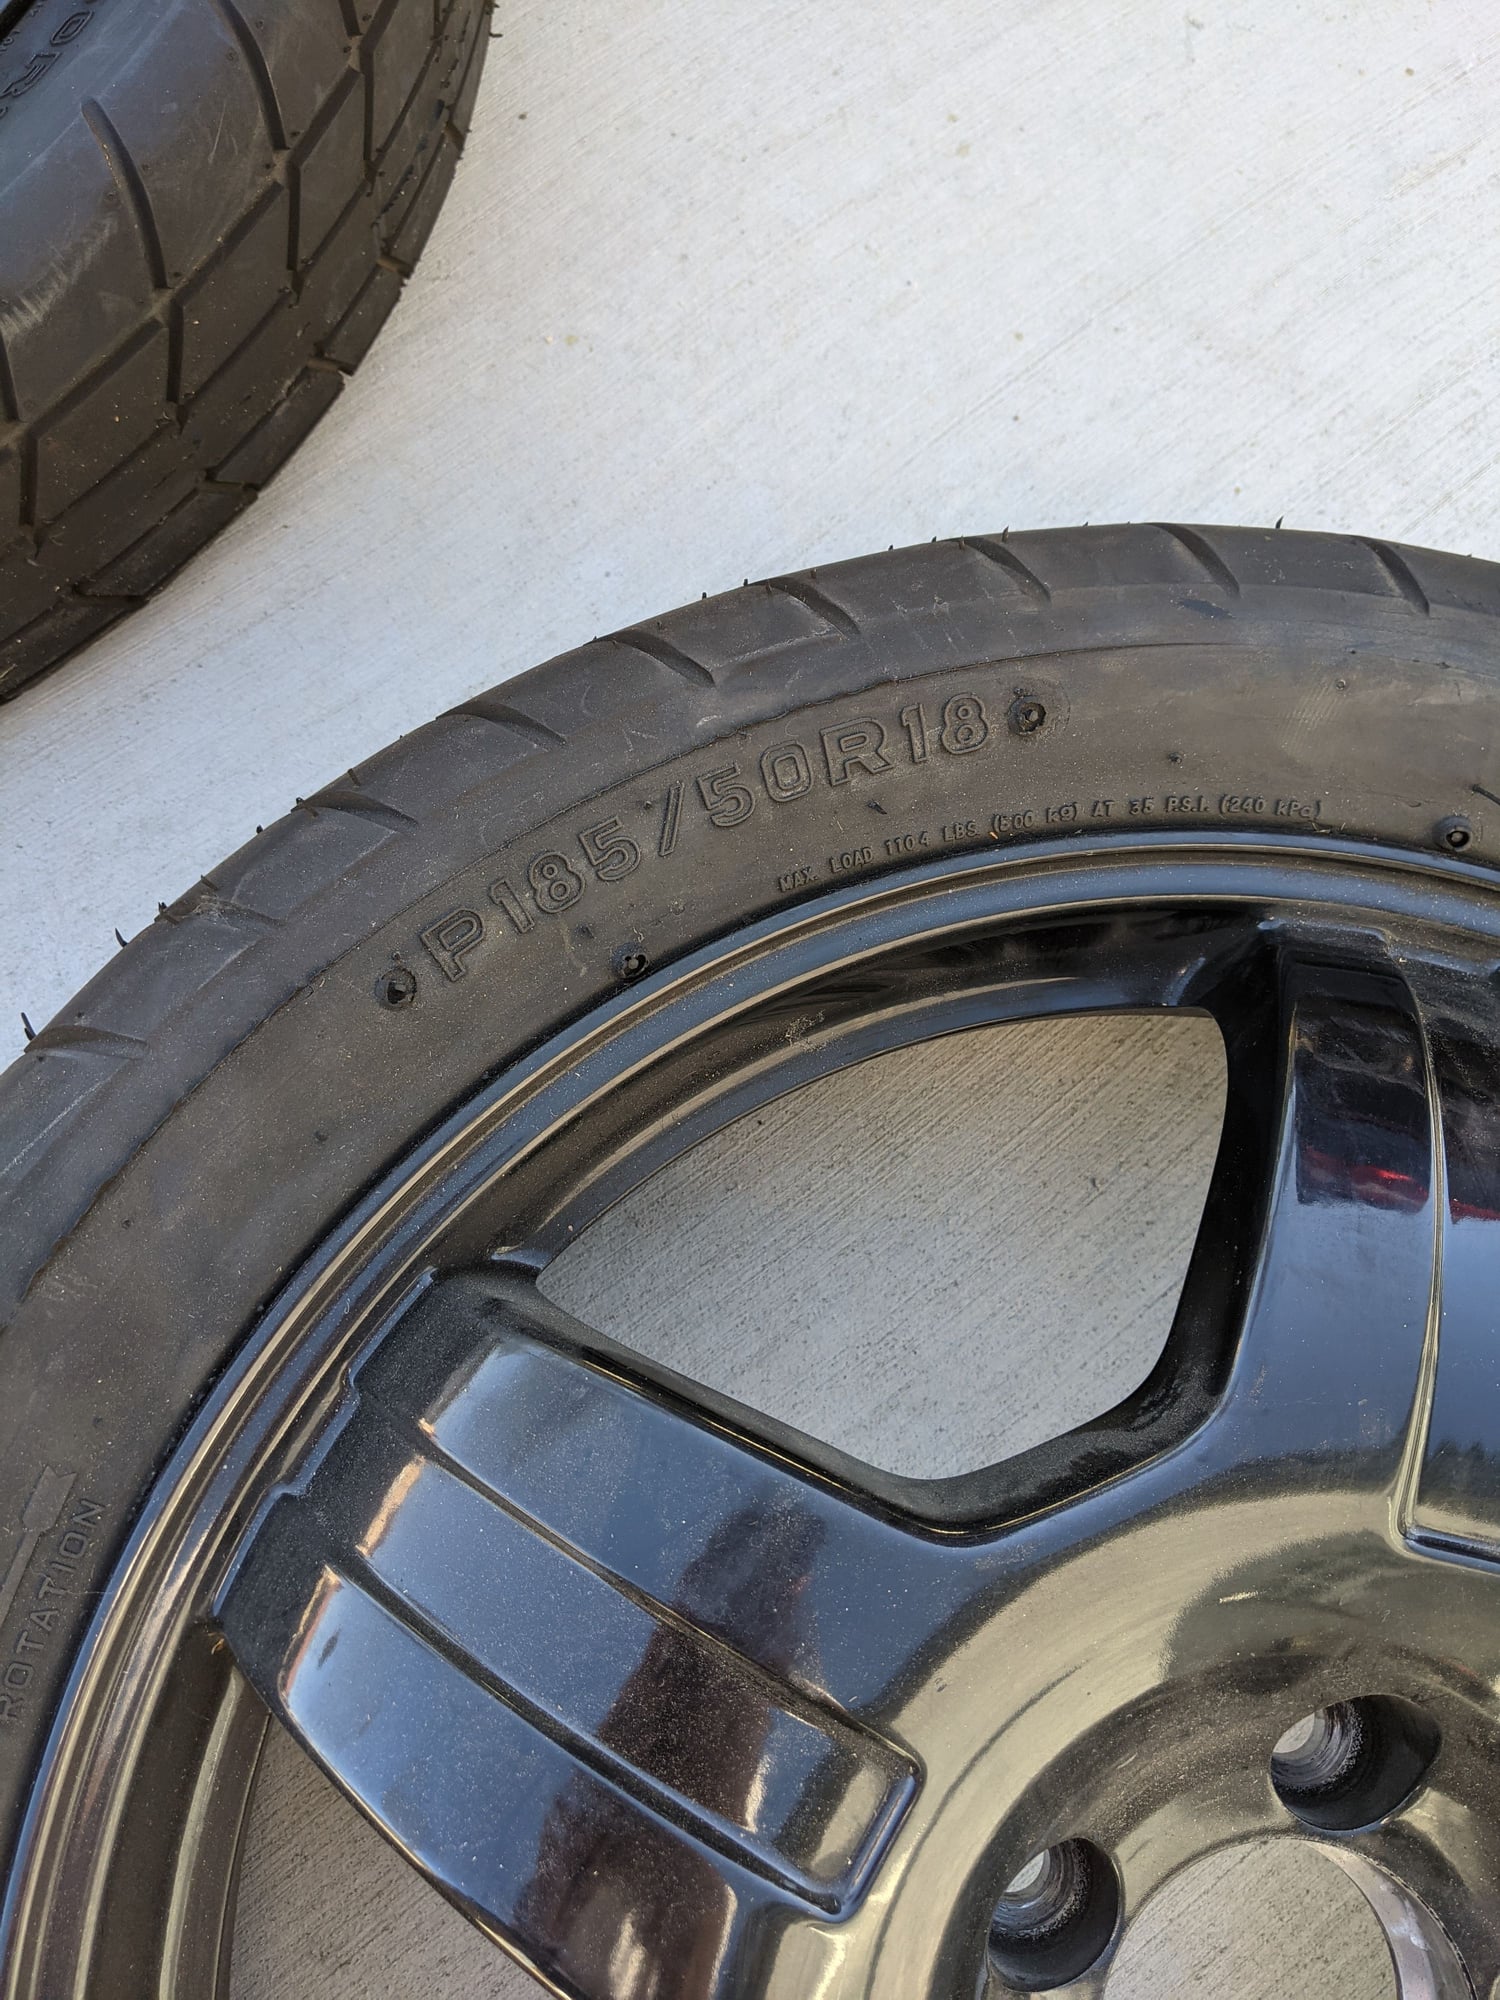 Wheels and Tires/Axles - AMG Front Drag Skinnies with M&H Racemaster Tires - Used - 2008 to 2015 Mercedes-Benz C63 AMG - Long Beach, CA 90812, United States